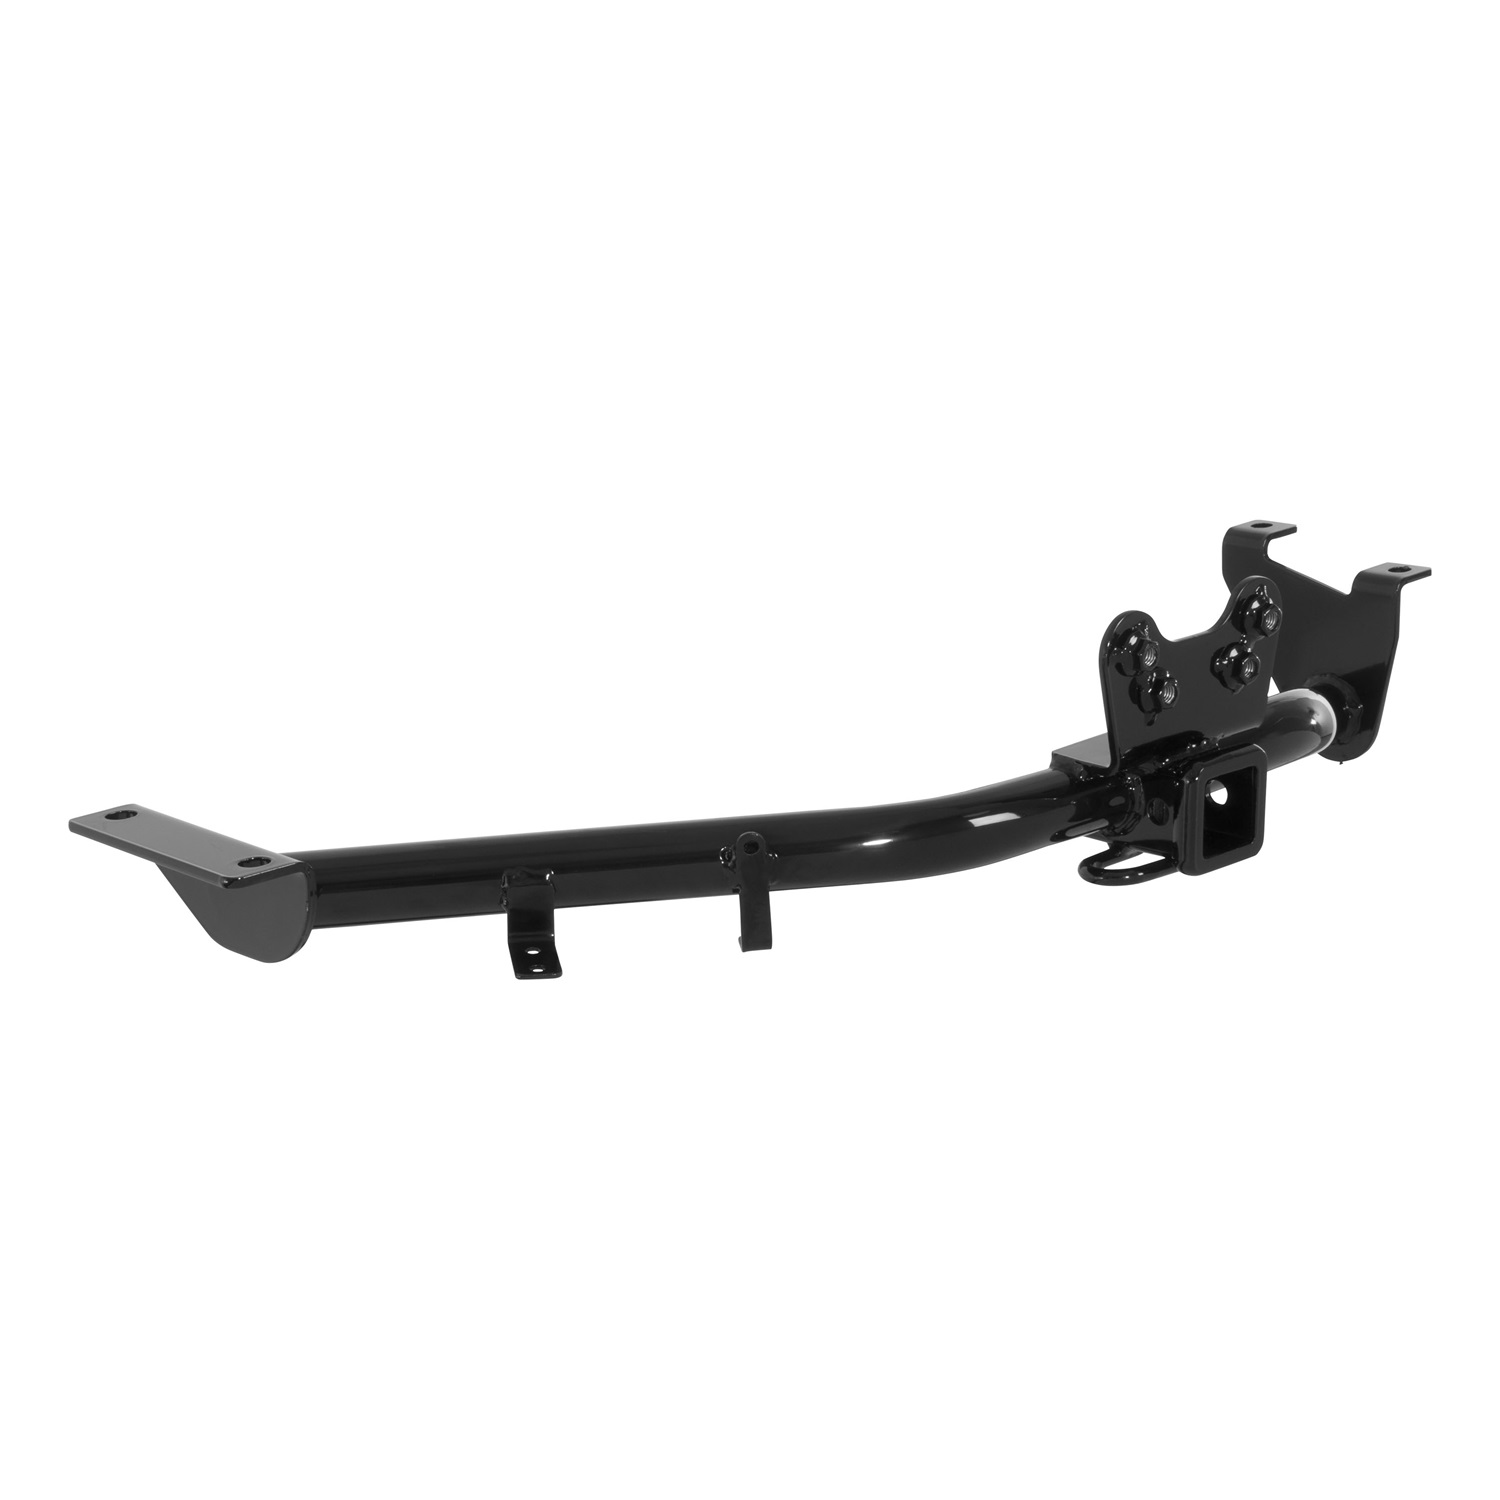 CURT Class 3 Trailer Hitch, includes installation hardware - image 2 of 3